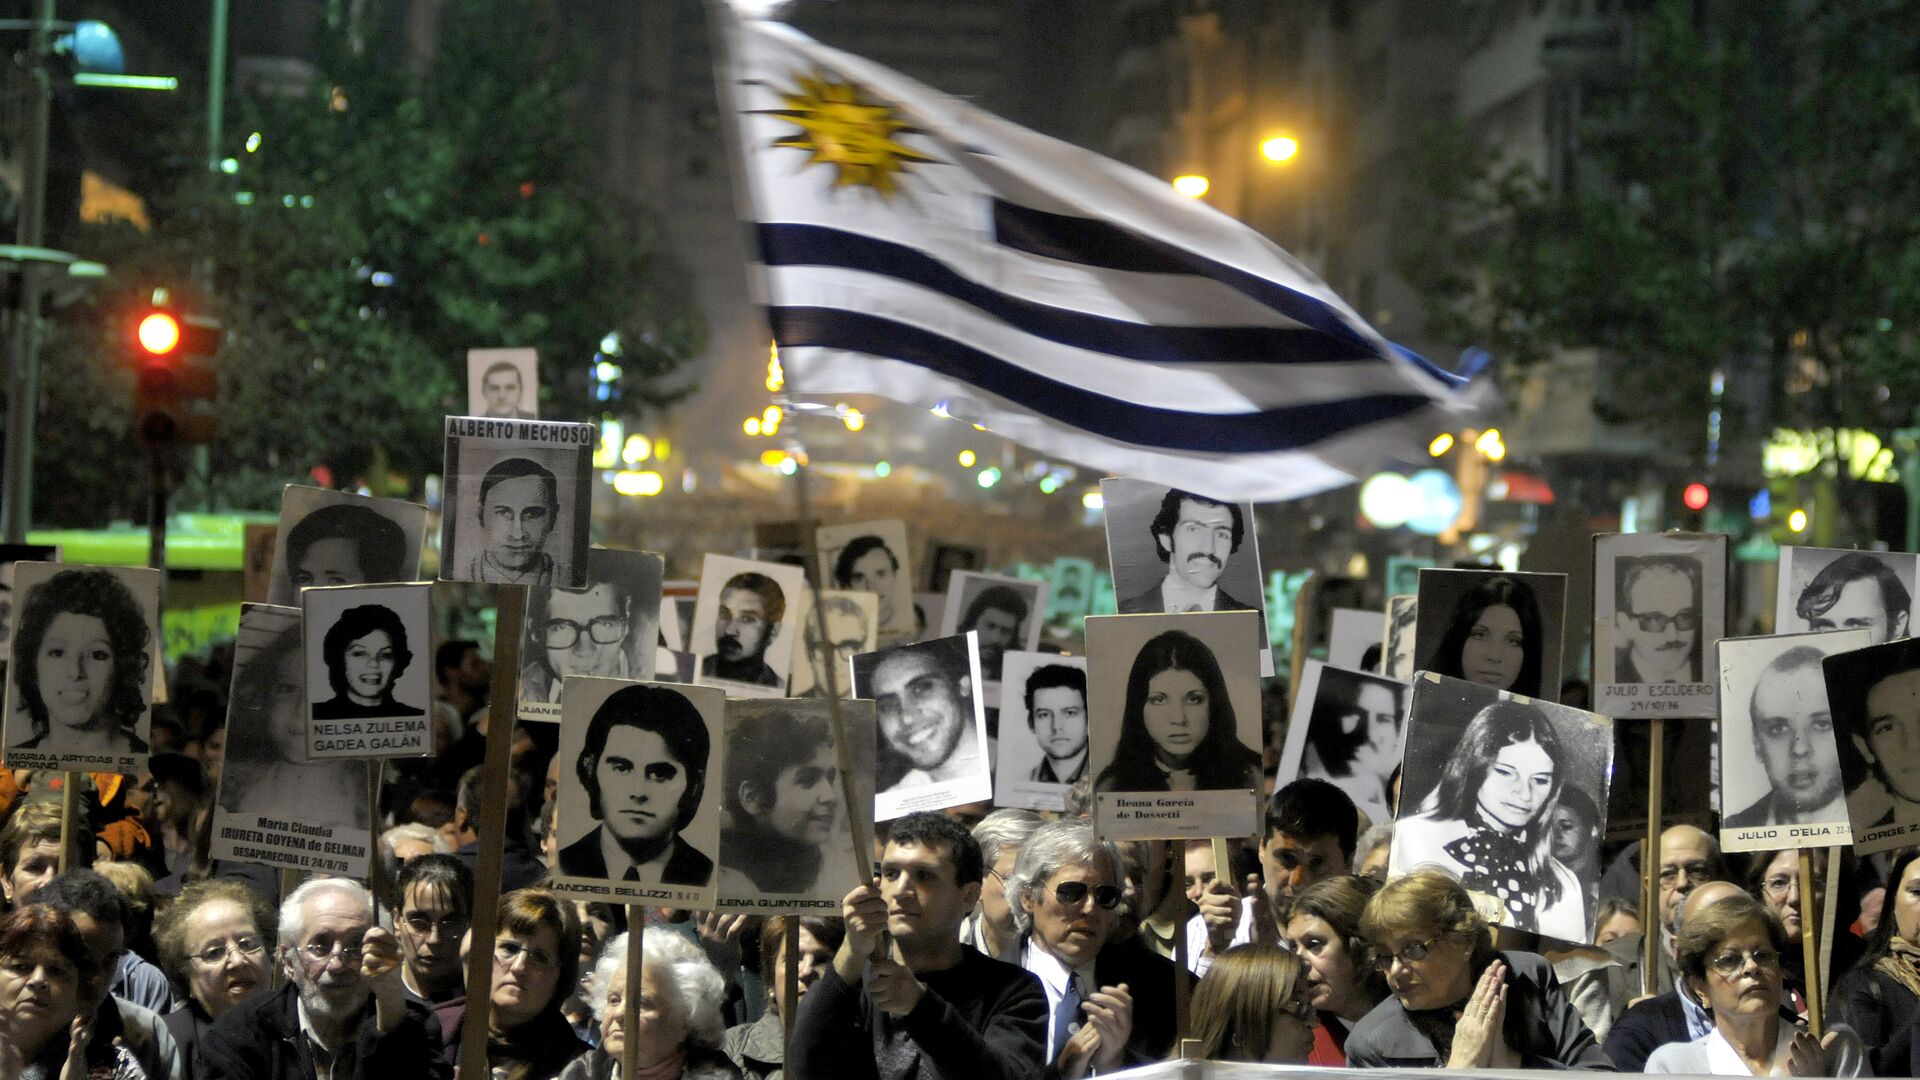 Demonstrators, one waving an Uruguayan flag, carry signs with images of people missing during Uruguay's 1973-85 dictatorship during a march in Montevideo, Uruguay - Sputnik Mundo, 1920, 04.05.2023